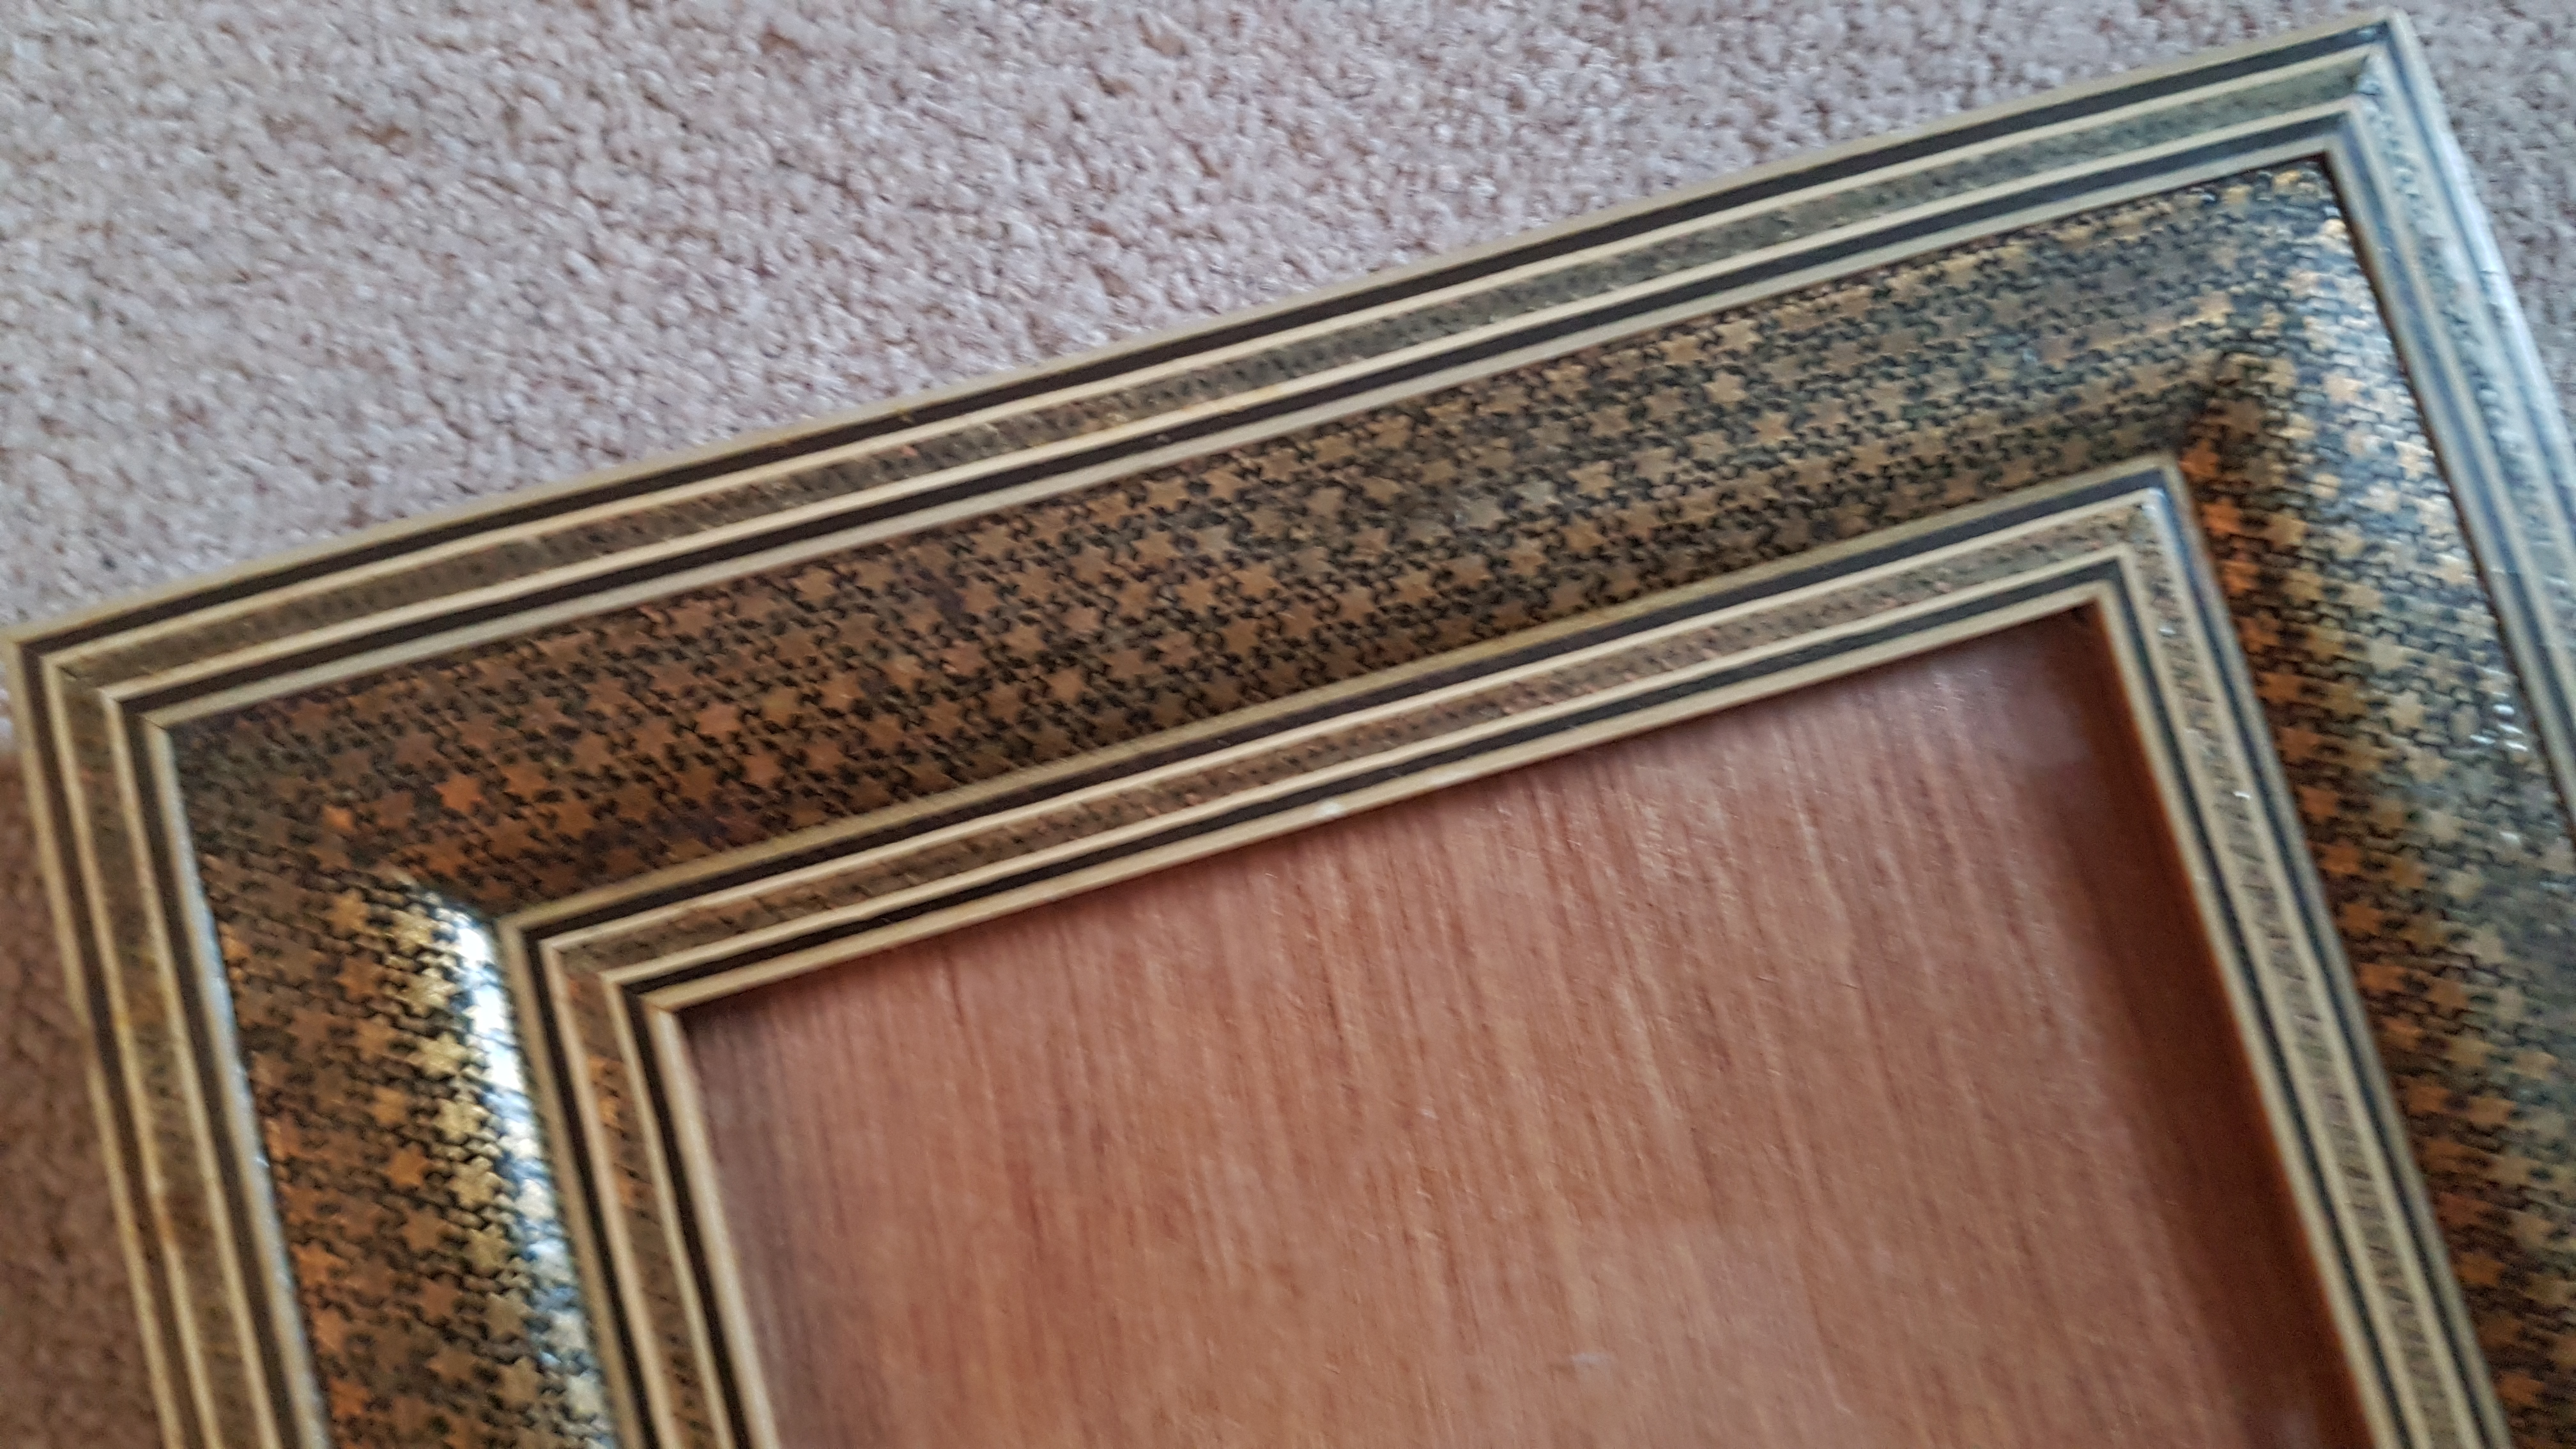 2 Vintage Persian Khatam Marquetry Mosaic Wood Frames, 1 W/Silver Birds In Relief - Image 3 of 5